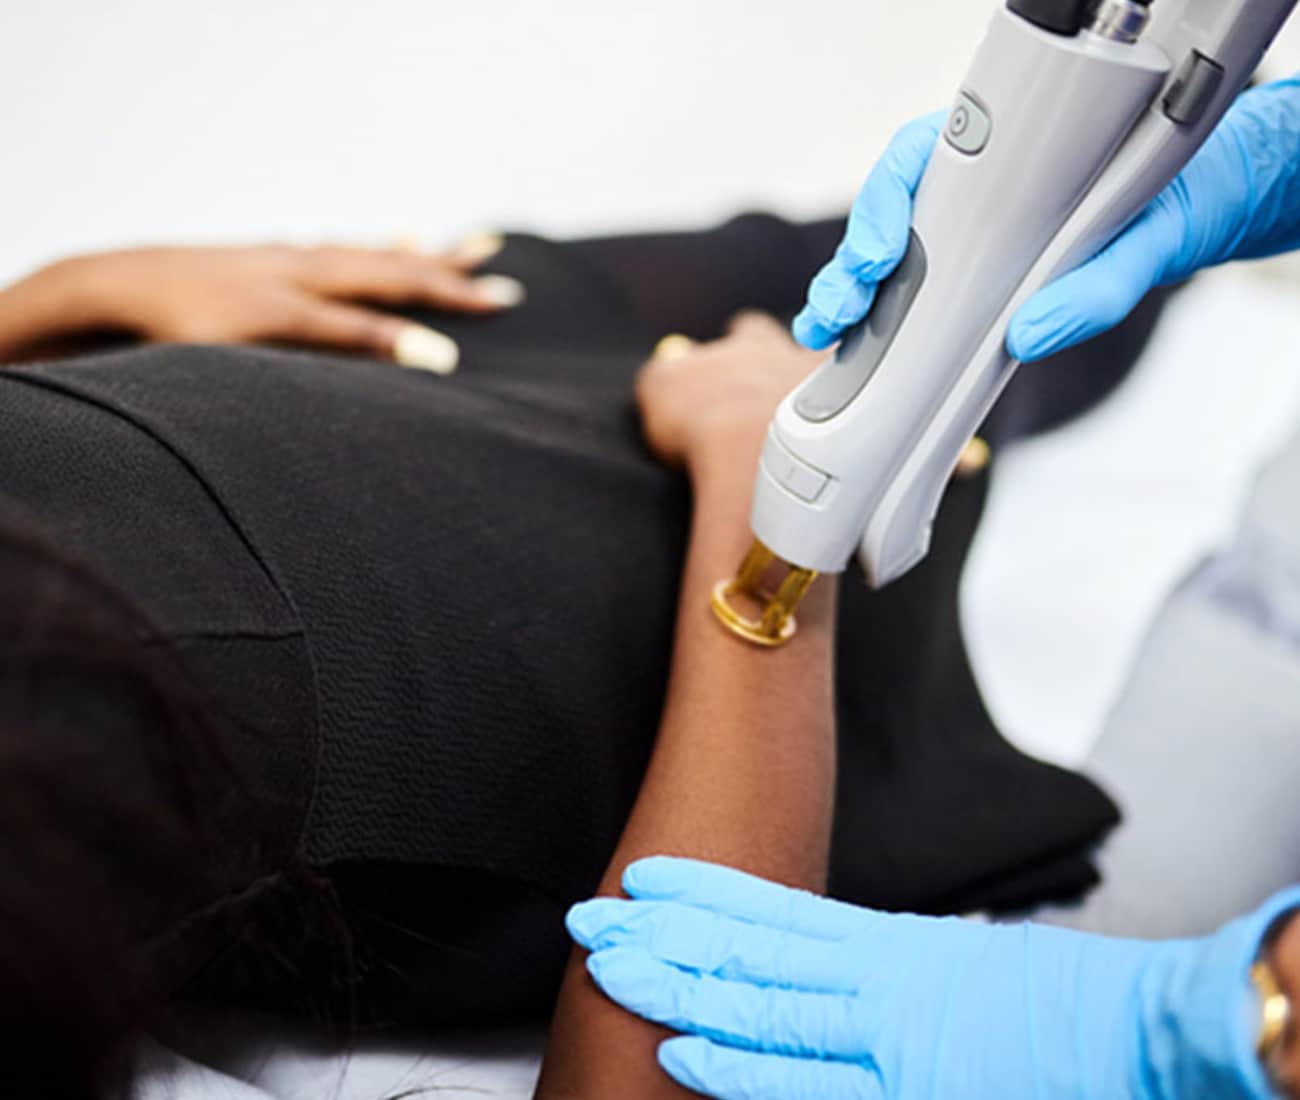 Woman receiving laser hair removal treatment on her arm